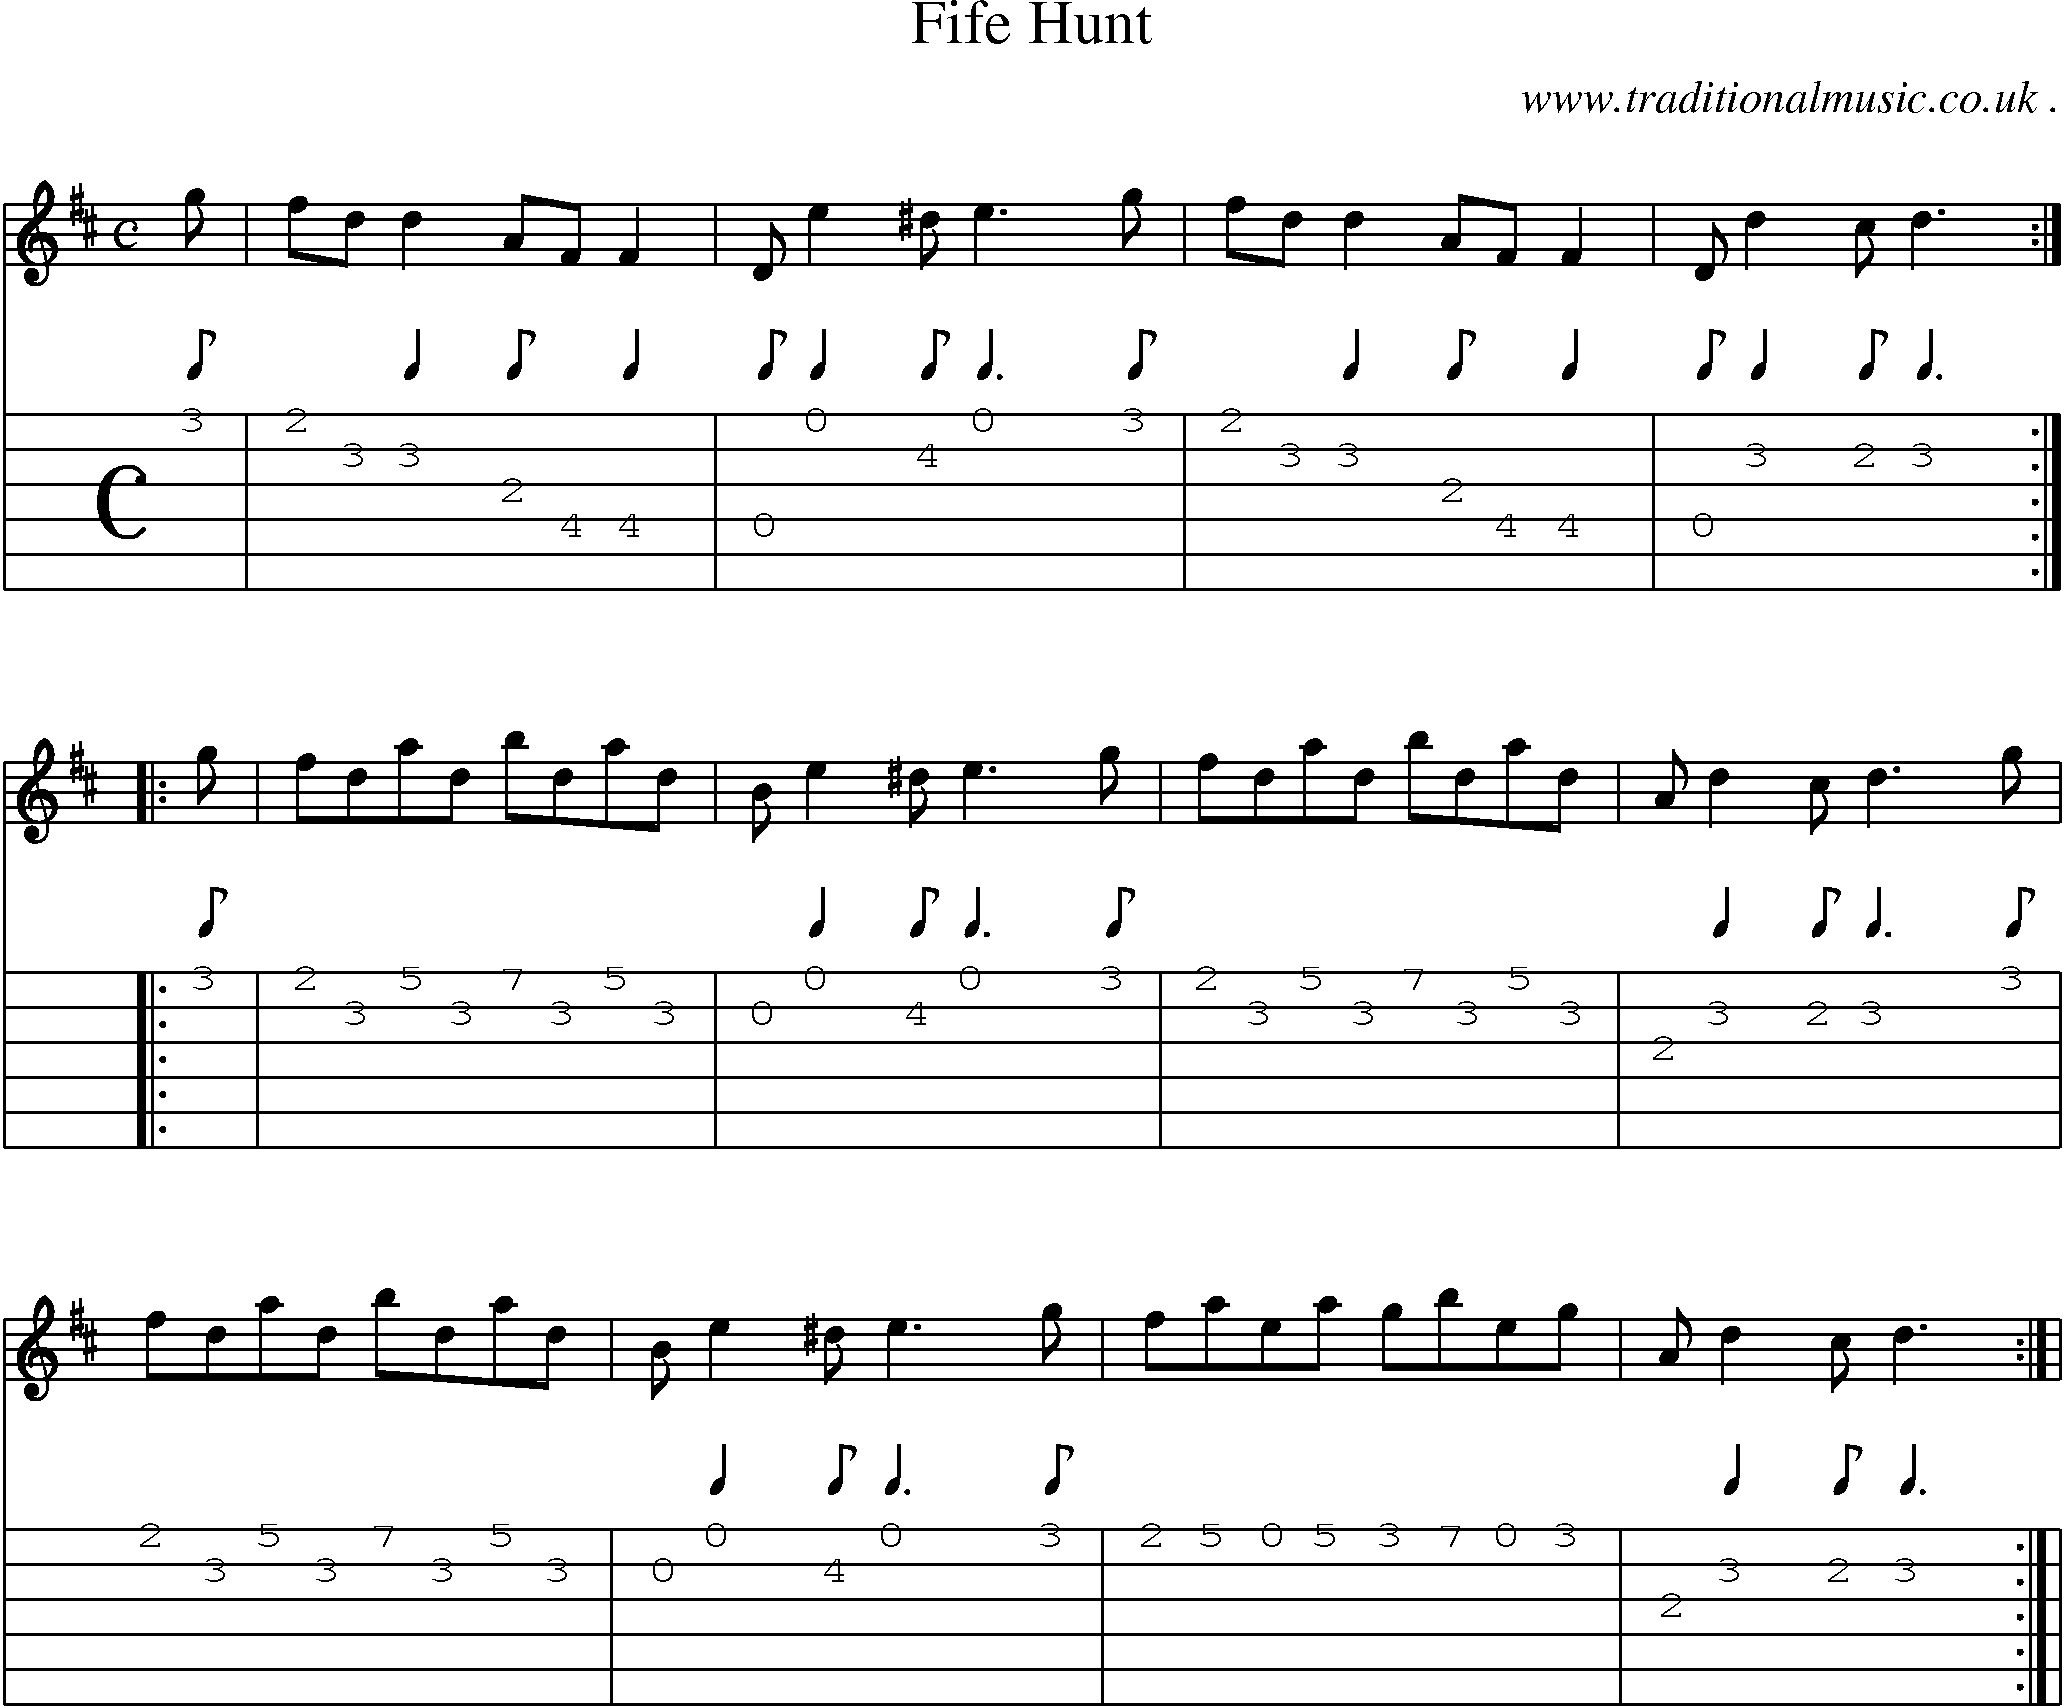 Sheet-Music and Guitar Tabs for Fife Hunt